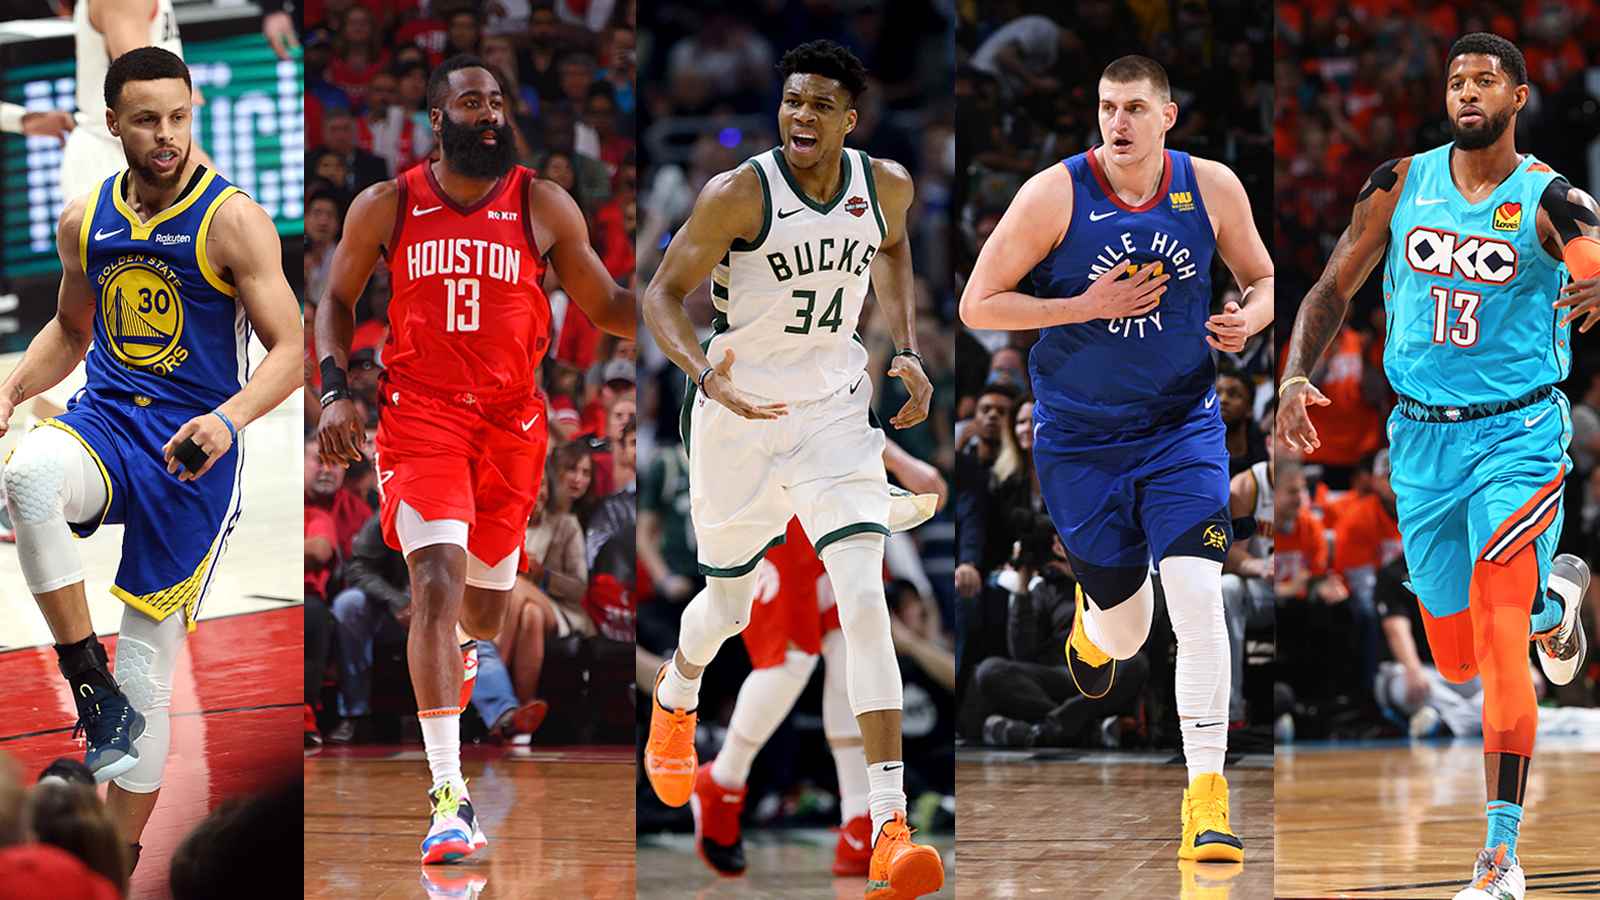 NBA Awards: Sixers' Joel Embiid in MVP mix with Rockets' James Harden,  Cavaliers' LeBron James, Warriors' Kevin Durant and Stephen Curry? 